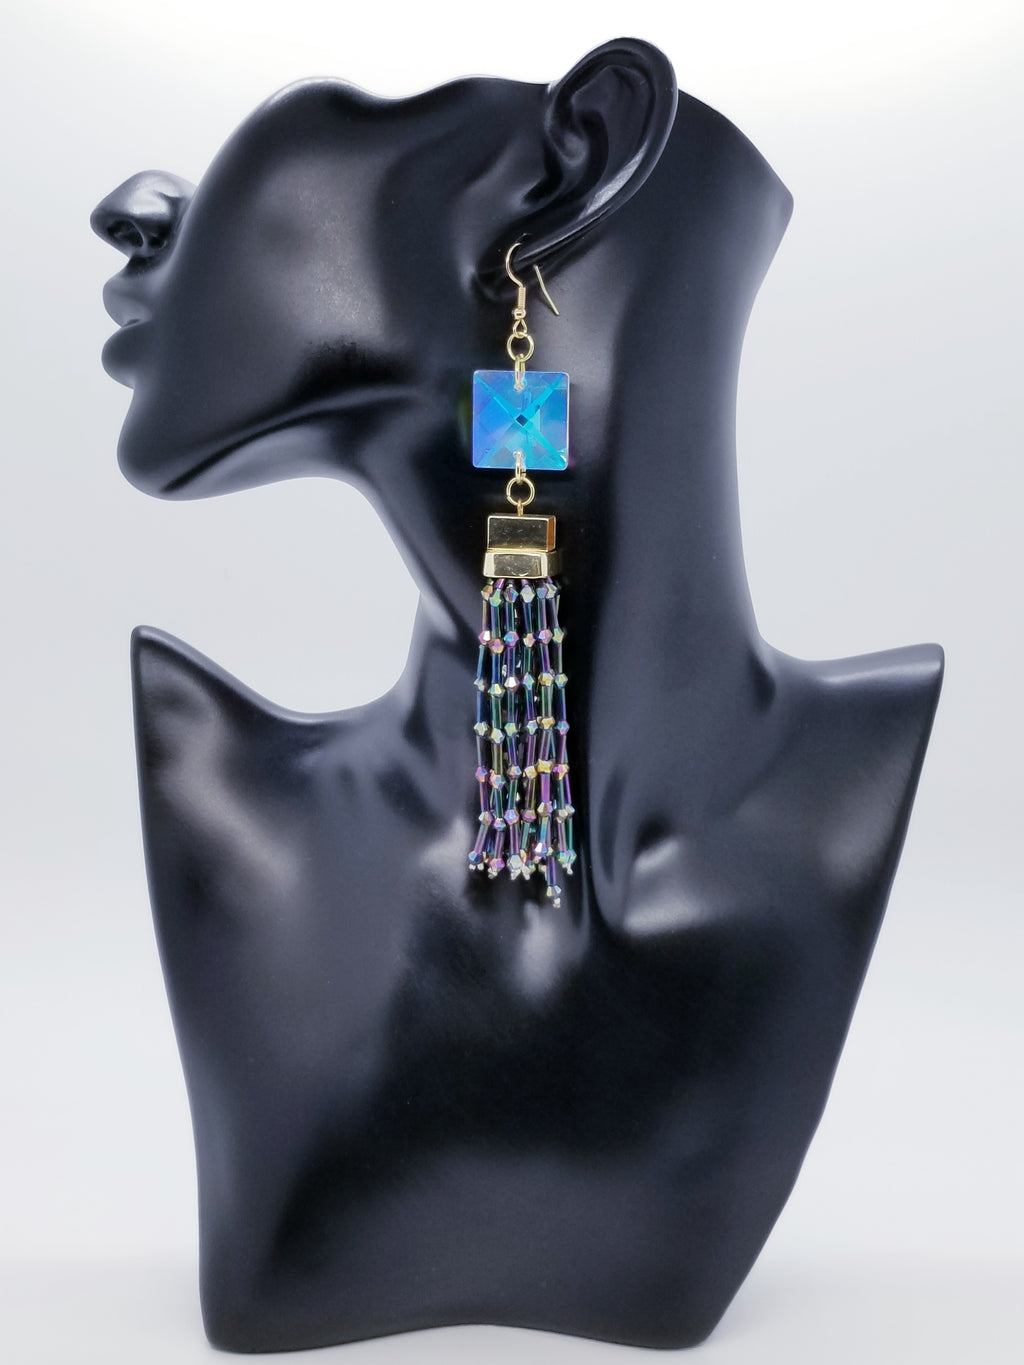 PLEASE BE AWARE: Earrings Hang Past Shoulders   Length: 5.5 inches | Weight: 1.4 ounces  Distinctly You! The earrings are handmade using iridescent square crystal stone beads, iridescent glass tassels, and hypoallergenic hooks with back closures. 